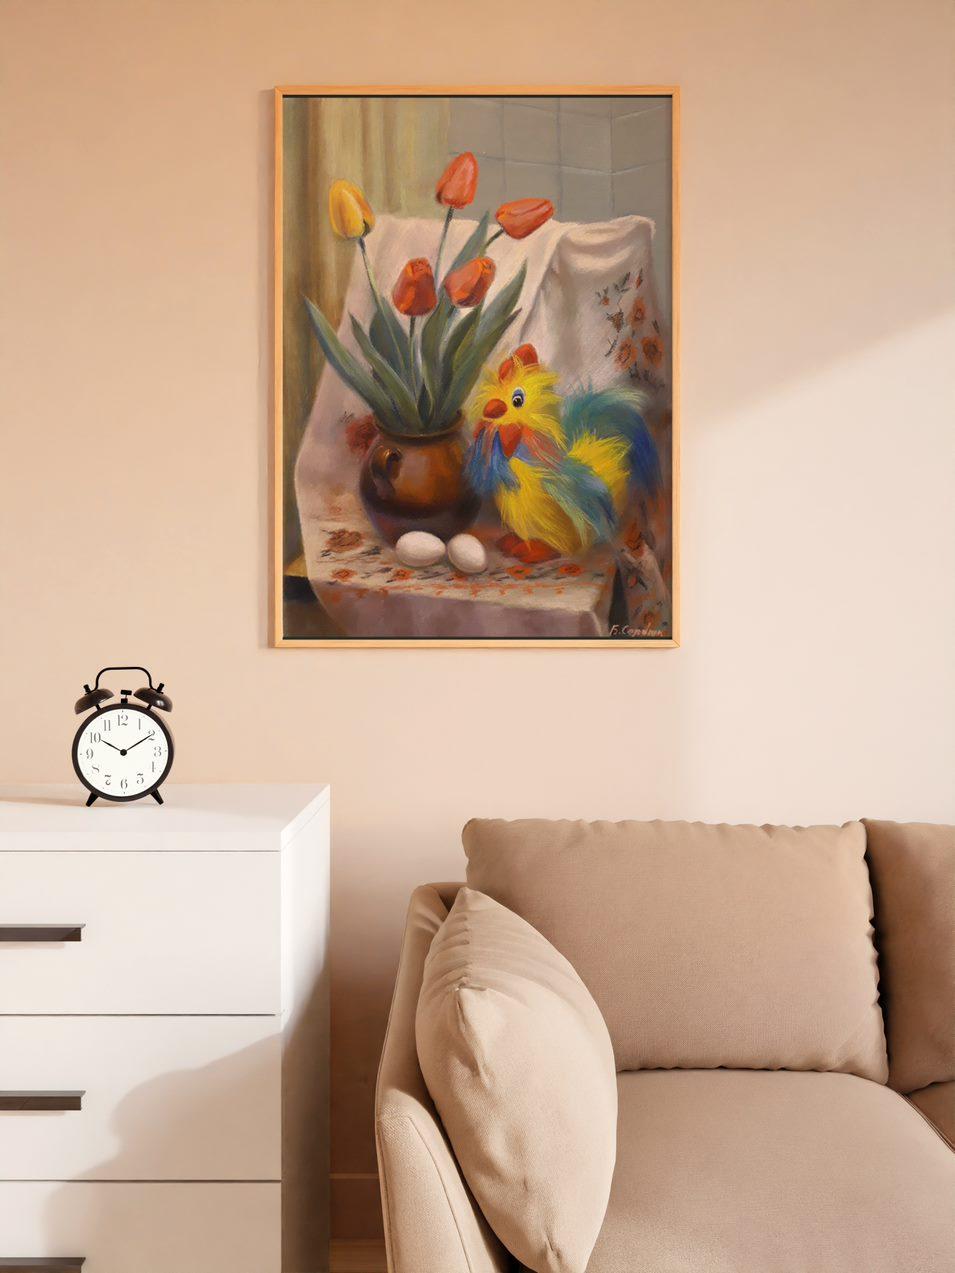 Artist: Boris Serdyuk 
Work: Original painting, handmade artwork, one of a kind 
Medium: Pastel on Paper
Style: Impressionism
Year: 2020
Title: Still Life with Rooster and Tulips 
Size: 27.5